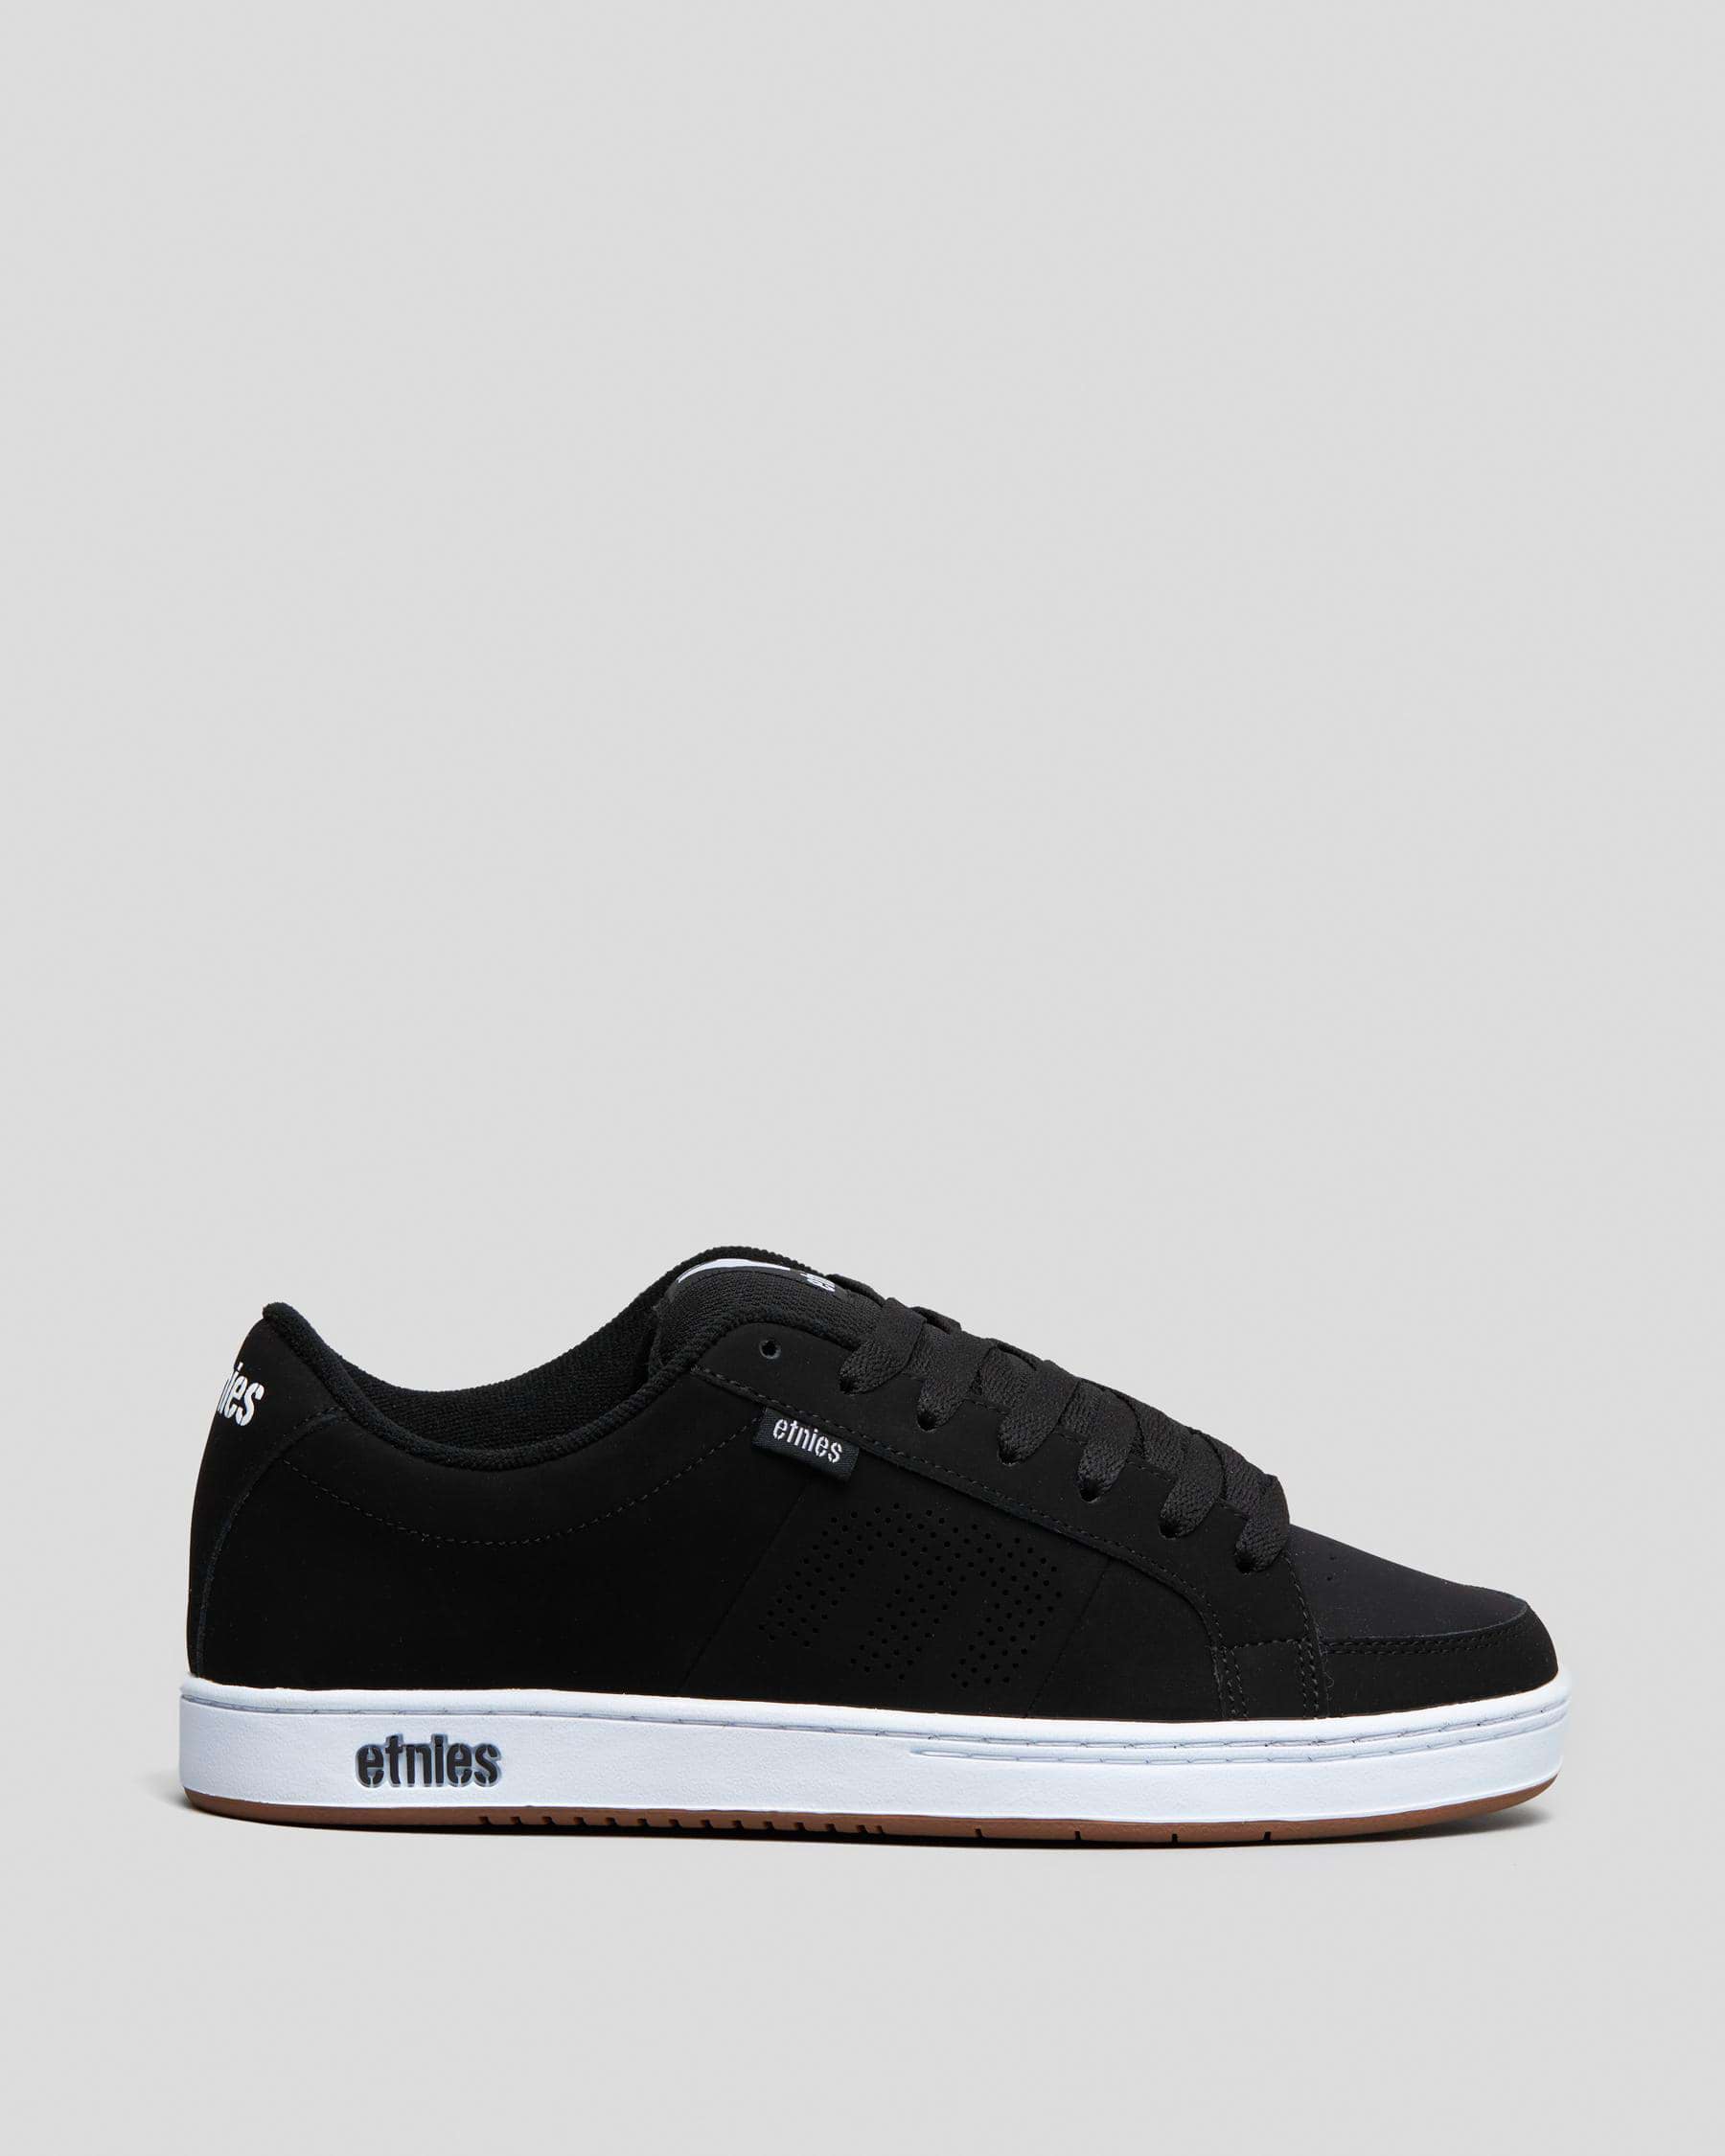 Shop Etnies Kingpin Shoes In Black/white/gum - Fast Shipping & Easy ...